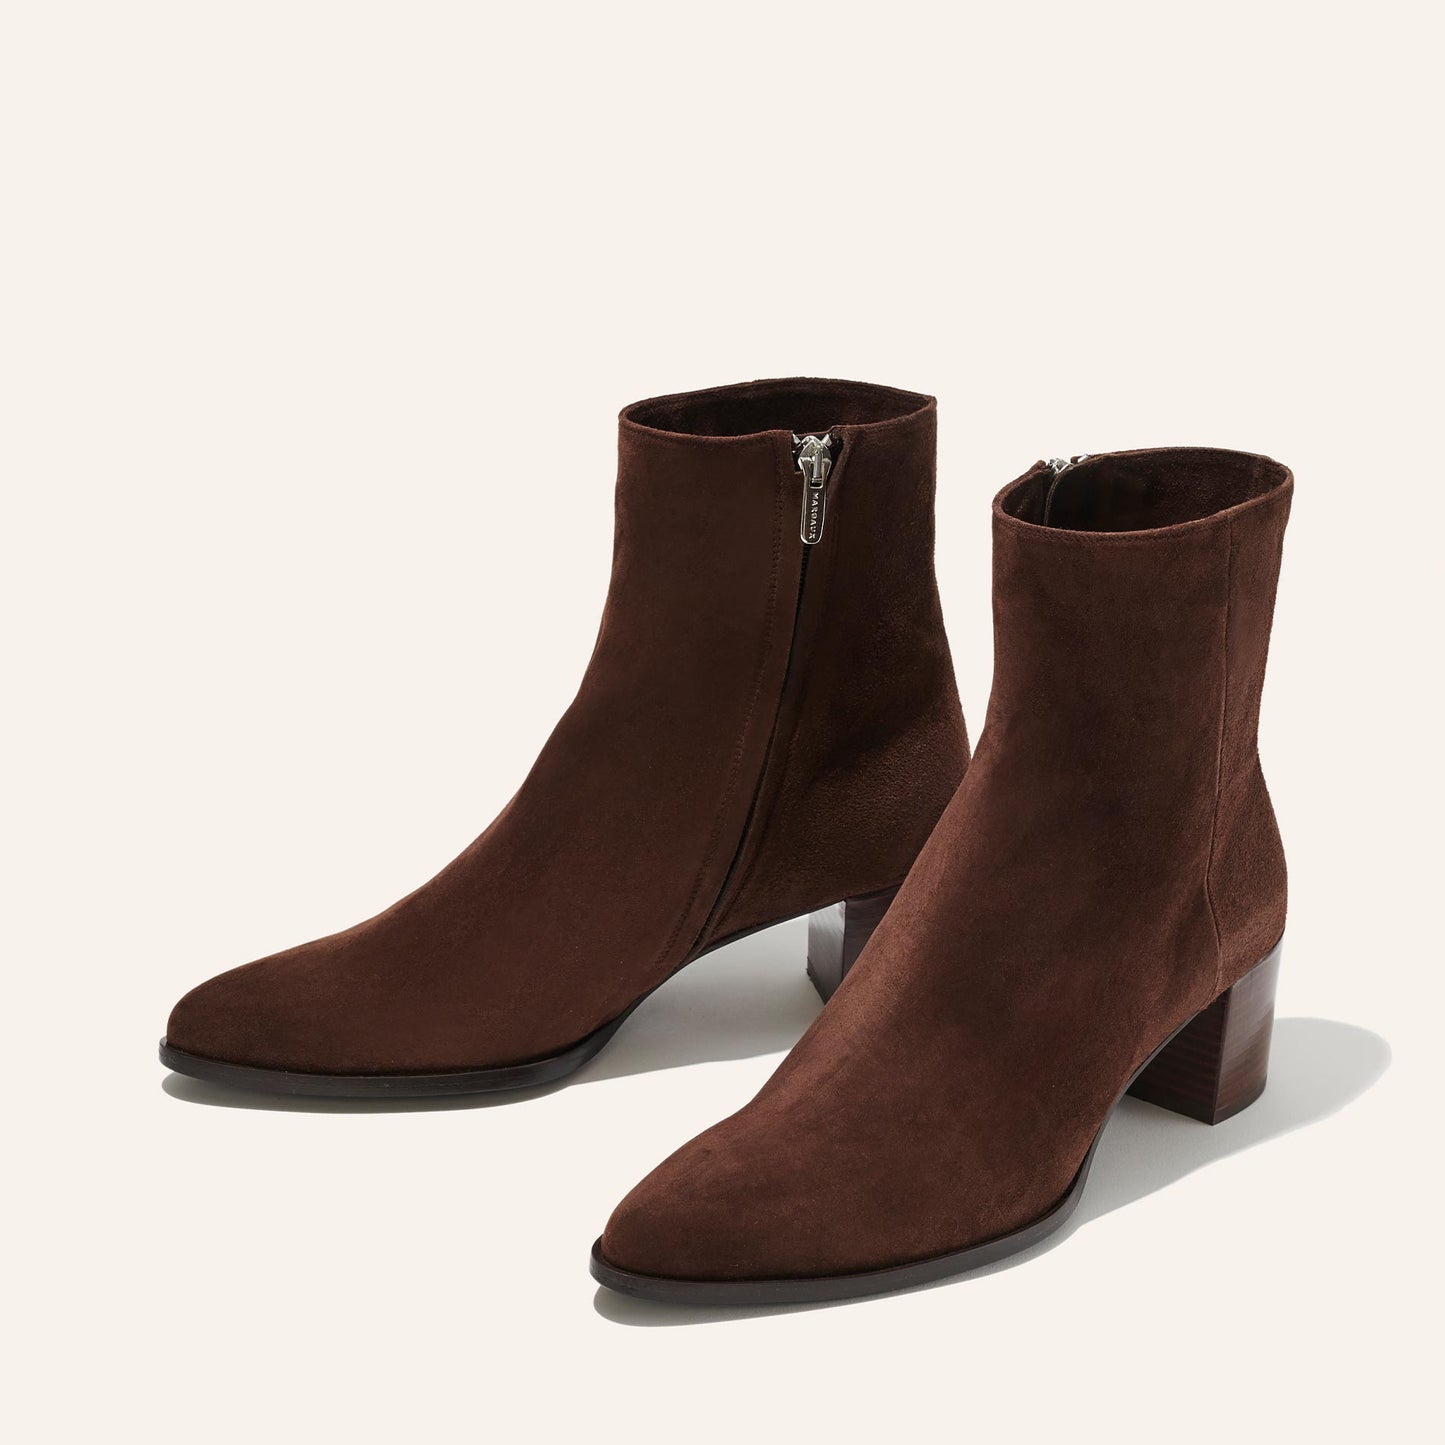 The Downtown Boot - Chocolate Suede